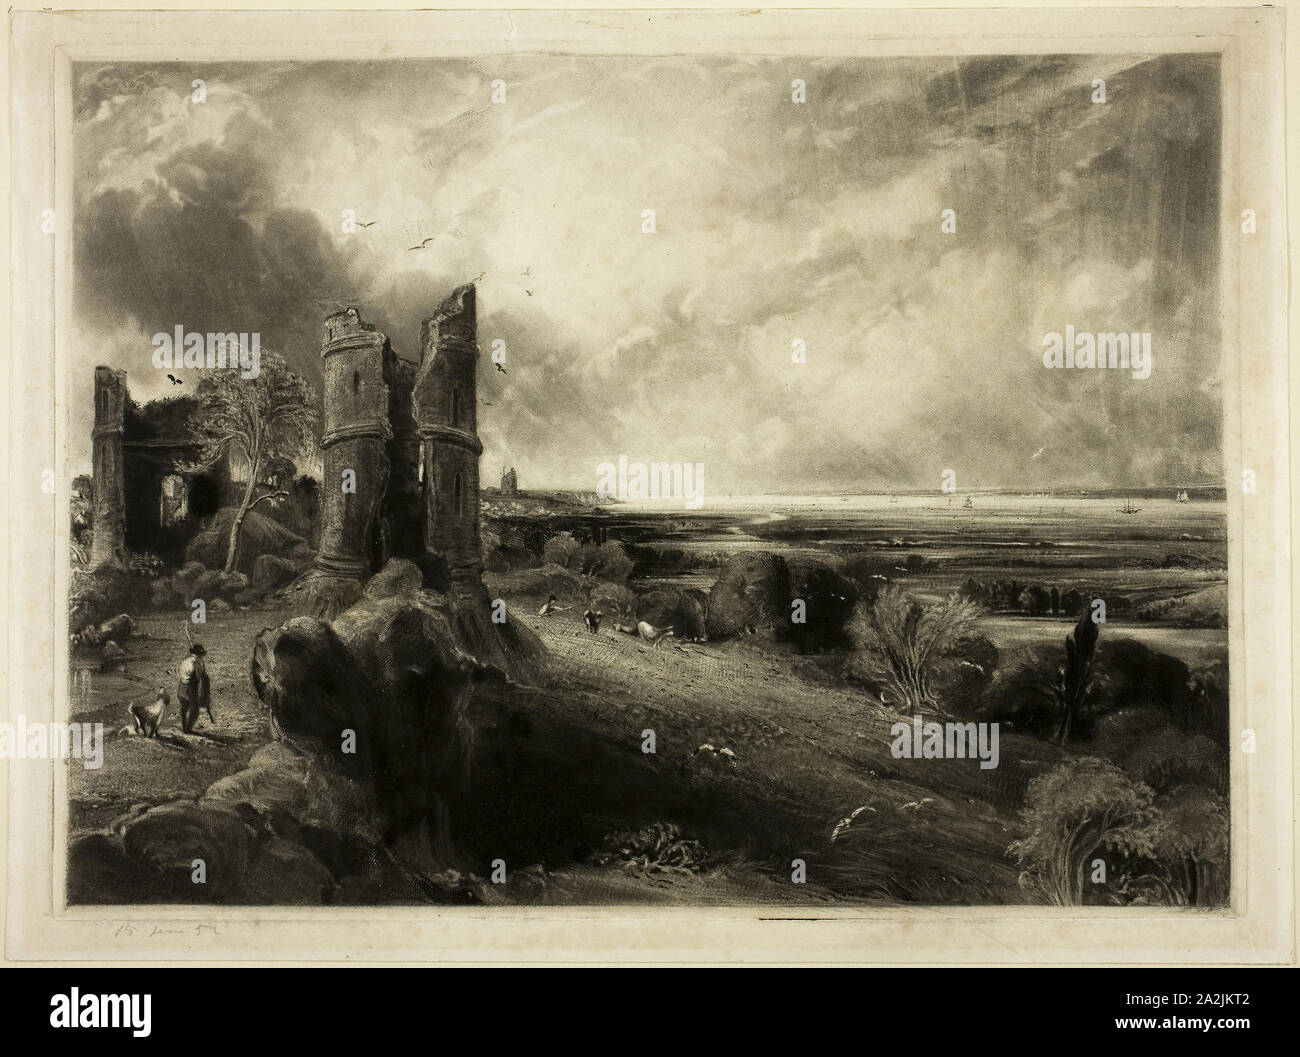 Hadleigh Castle Near the Nore, 1831–32, published 1832, David Lucas (English, 1802-1881), after John Constable (English, 1776-1837), England, Mezzotint on paper, 267 × 364 mm (image), 276 × 373 mm (plate), 299 × 401 mm (sheet Stock Photo